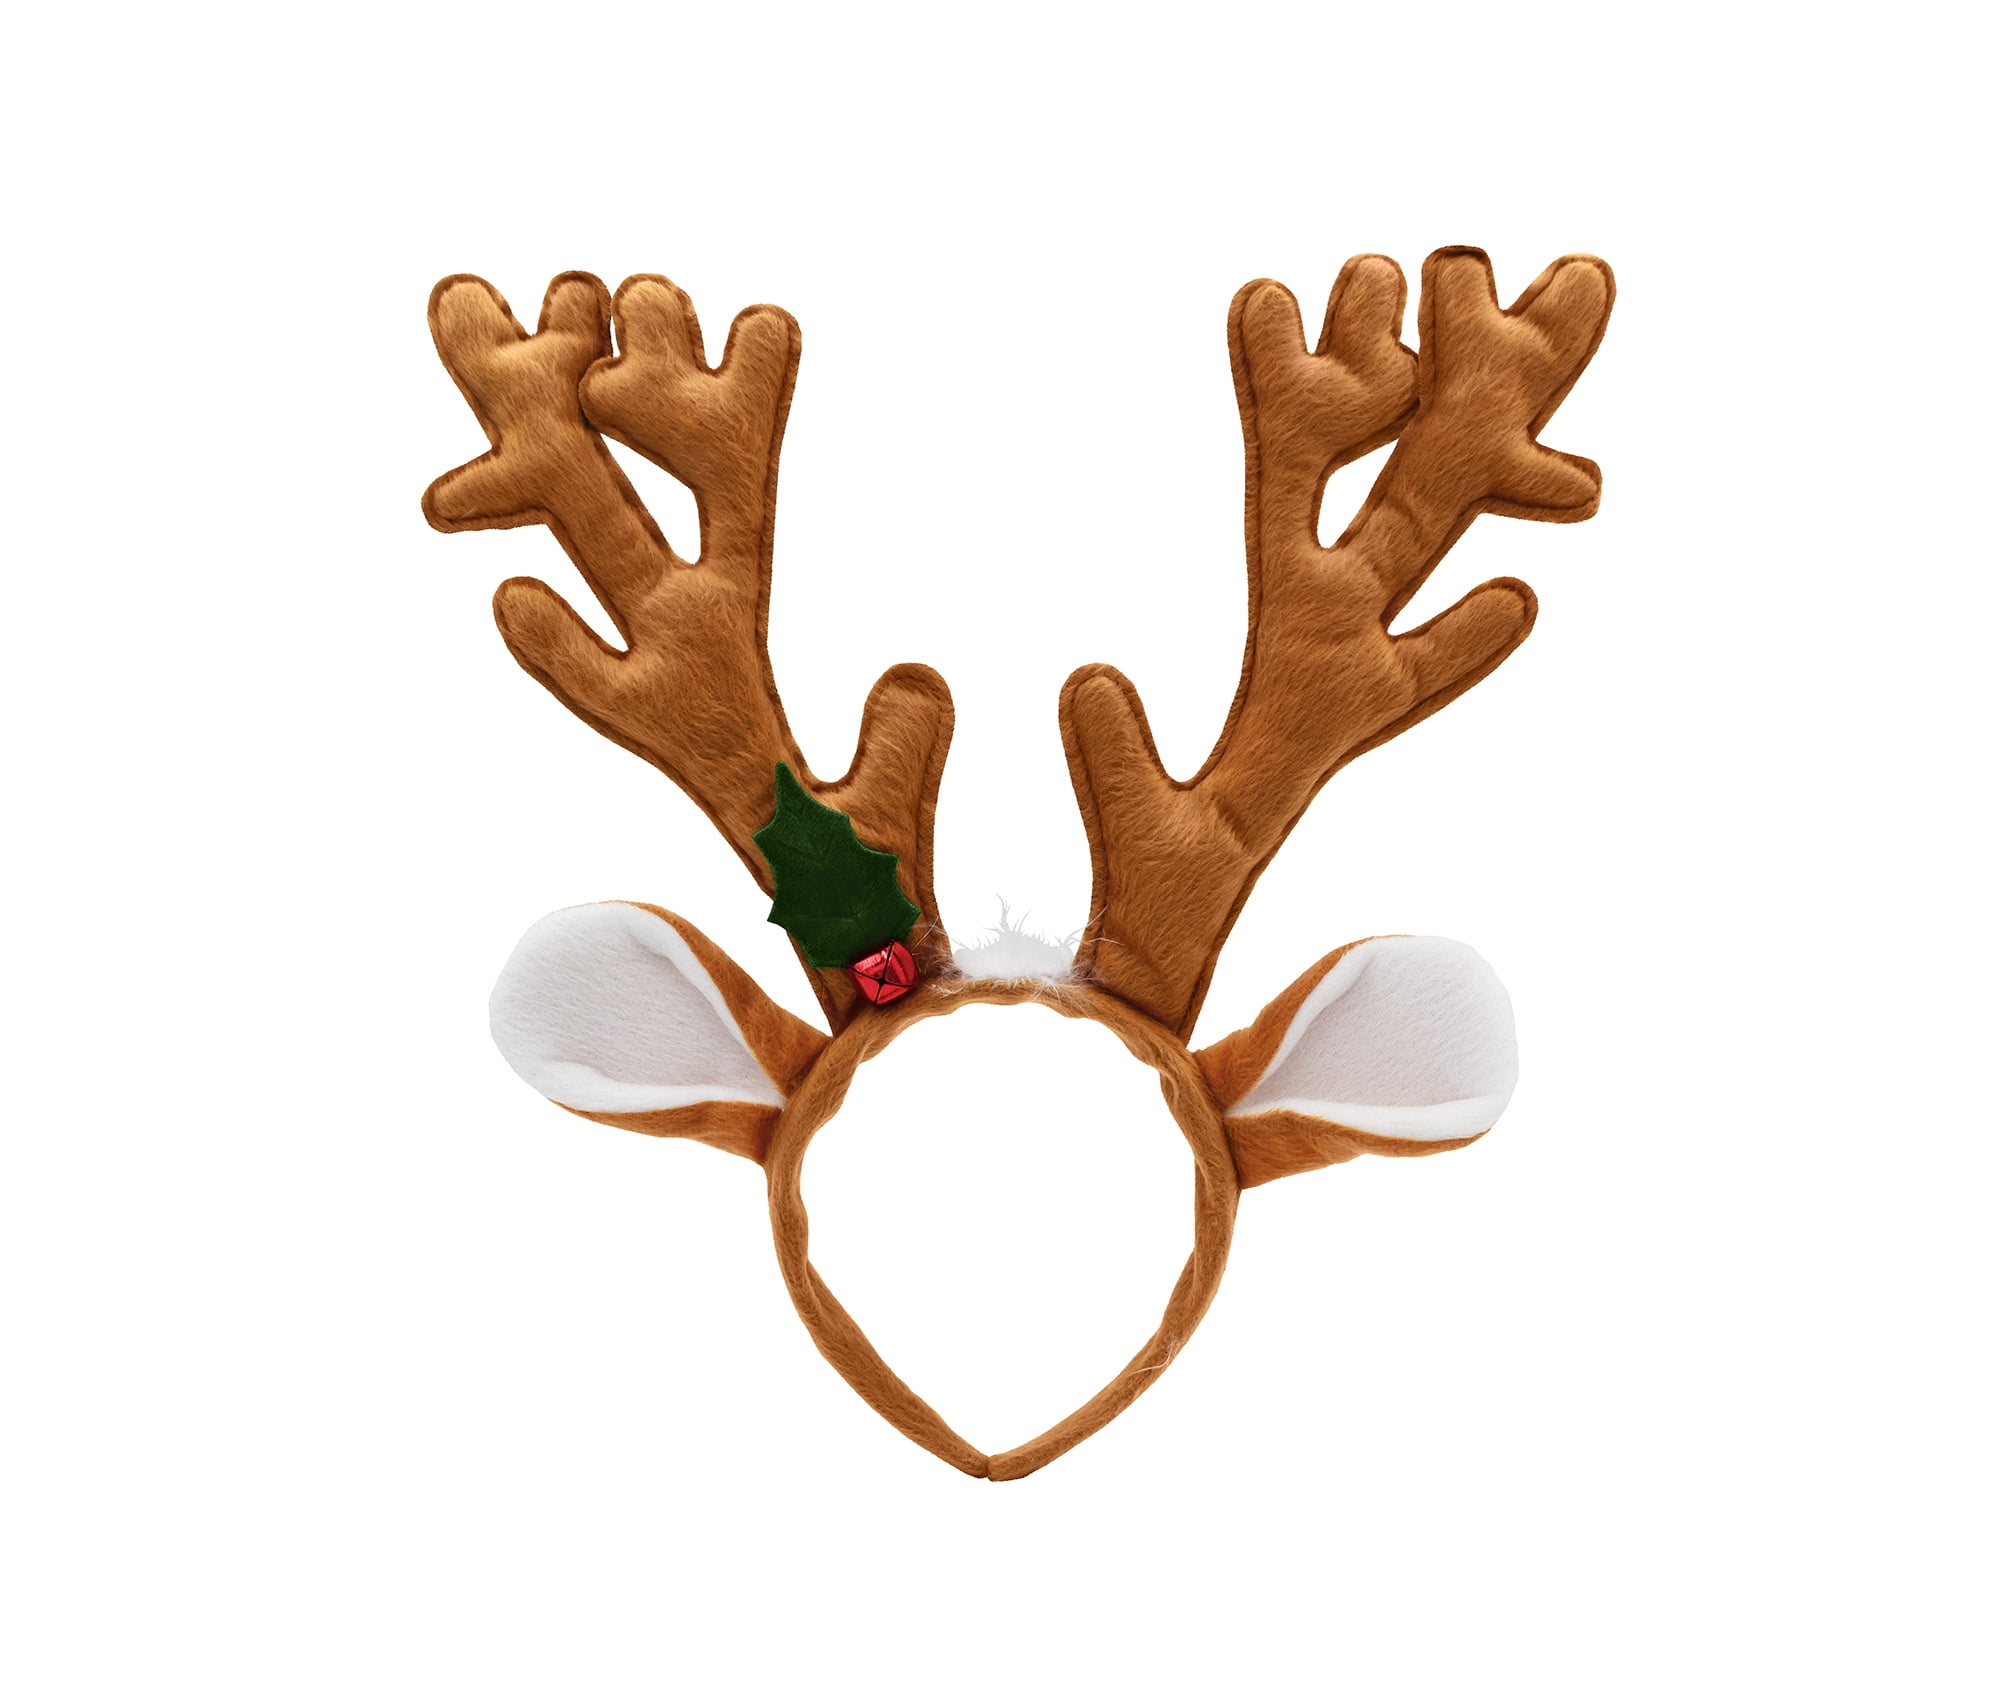 Adult Reindeer Antlers Holiday Headband - Deer Antler Horns and Ears -  Christmas Holly Berries Accent - Animal Cosplay Costume Accessory,  Multi-color